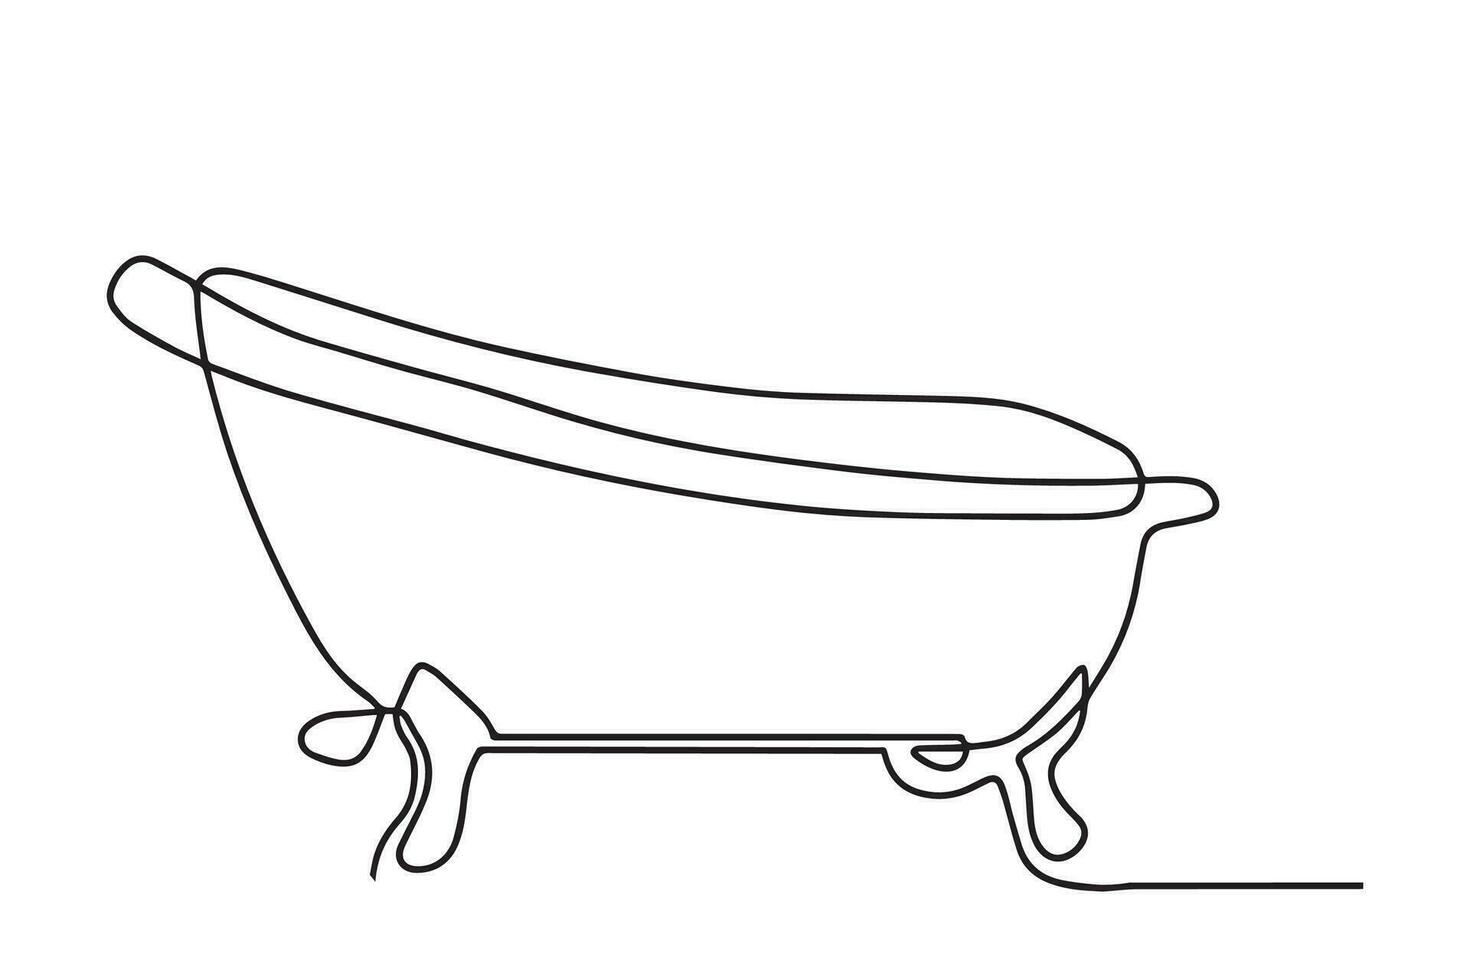 Continuous one line of bathtub in silhouette on a white background. Bathtub in continuous line art drawing style. Vector